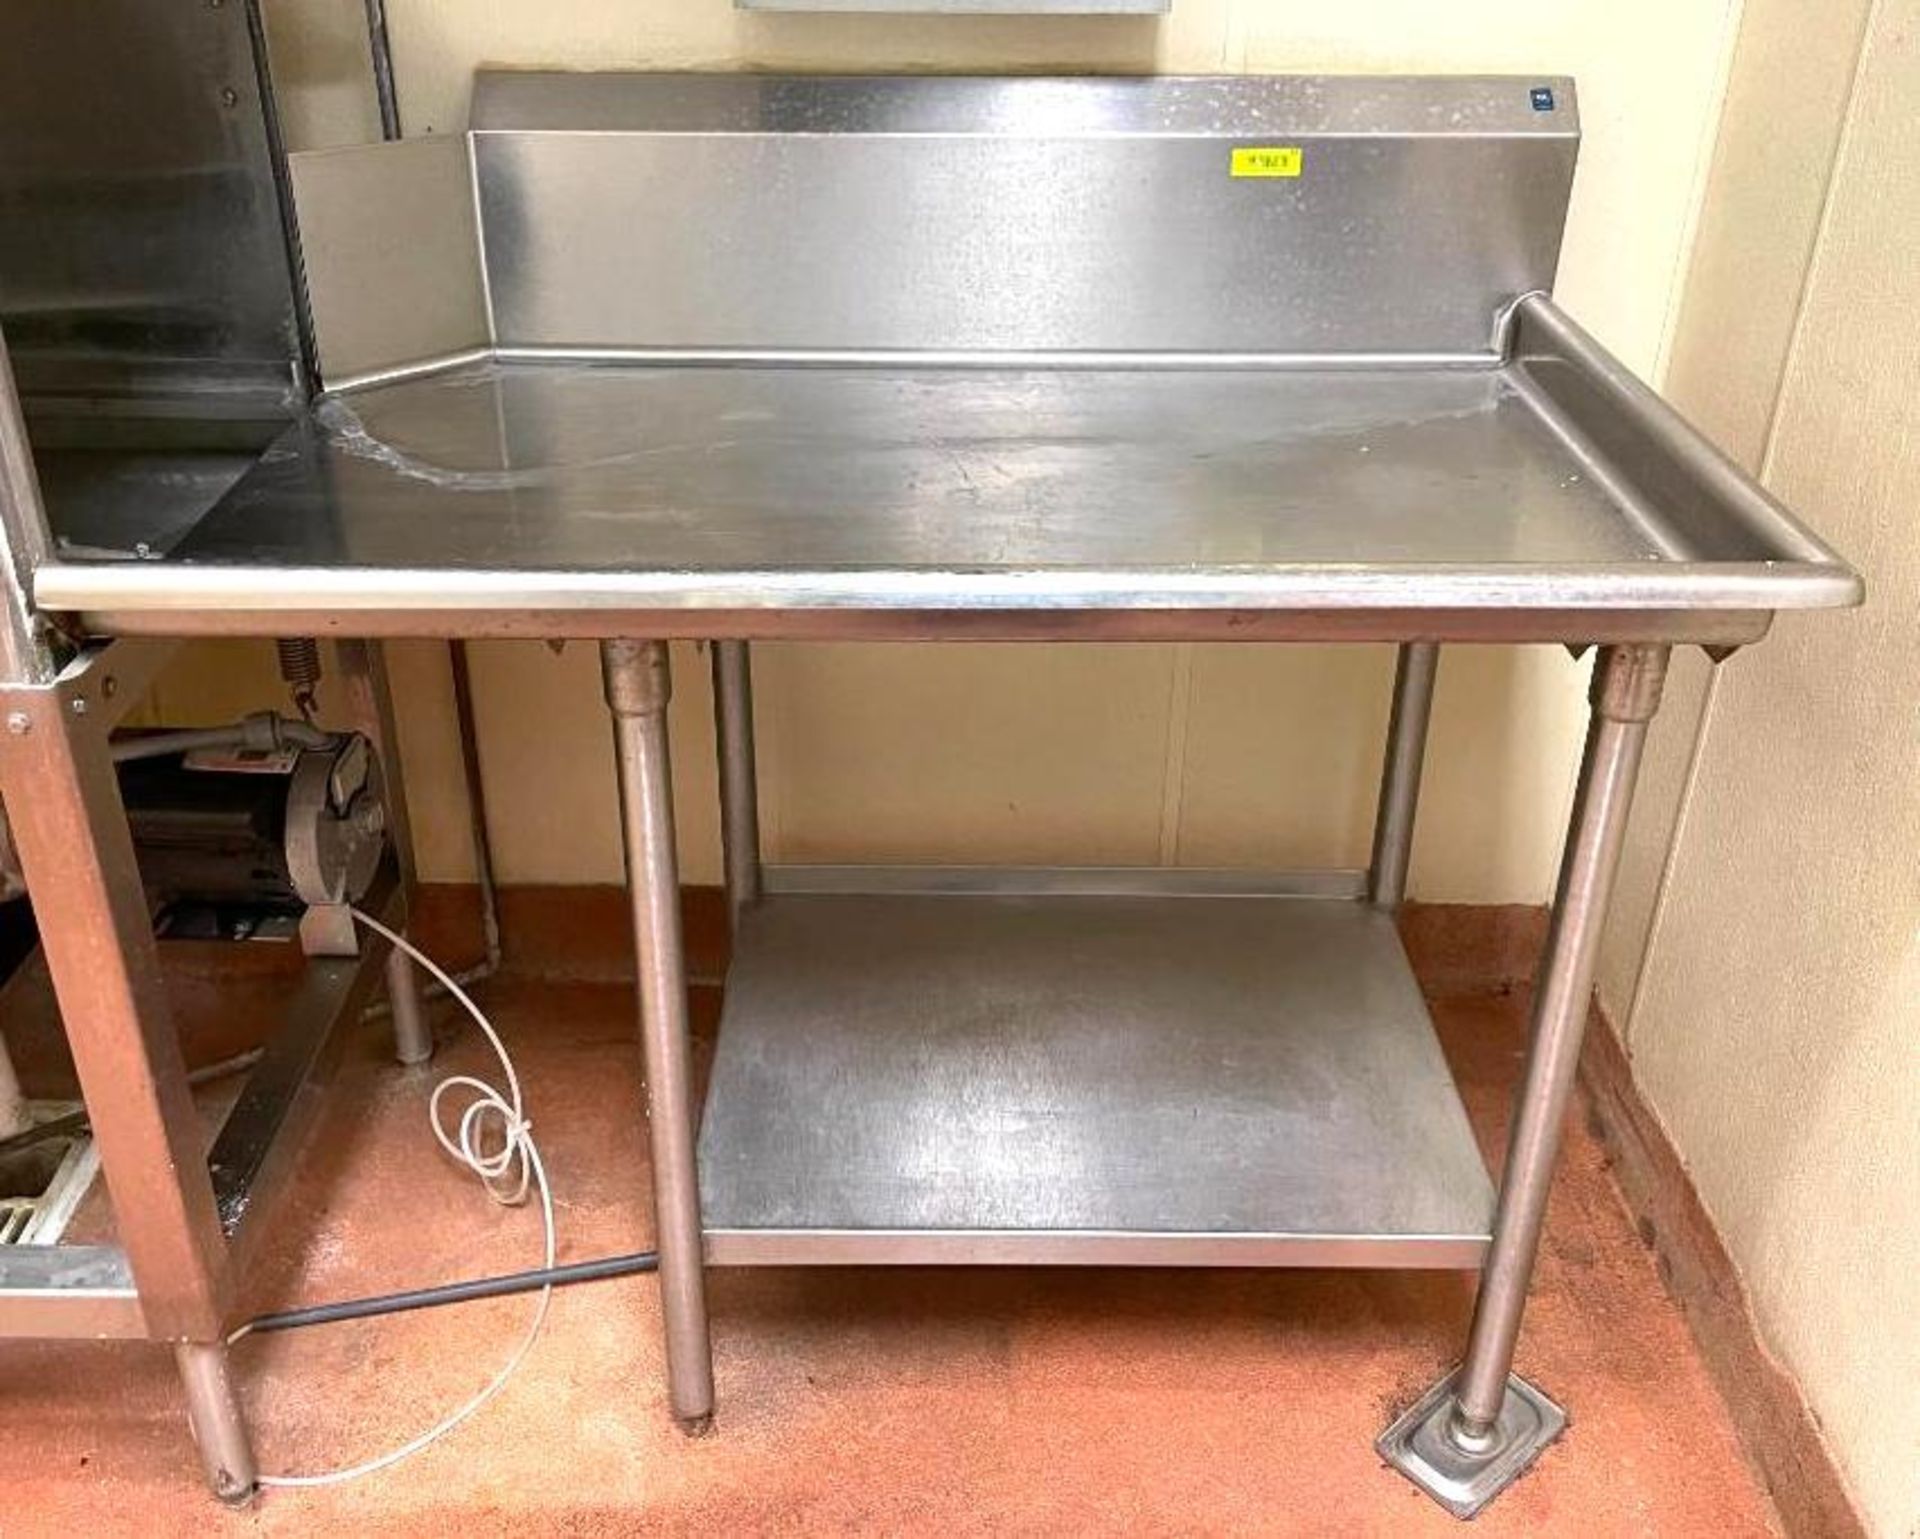 DESCRIPTION LEFT-SIDE DISH RECEIVING STAINLESS STEEL TABLE WITH UNDERSTORAGE SIZE 48" QUANTITY: X BI